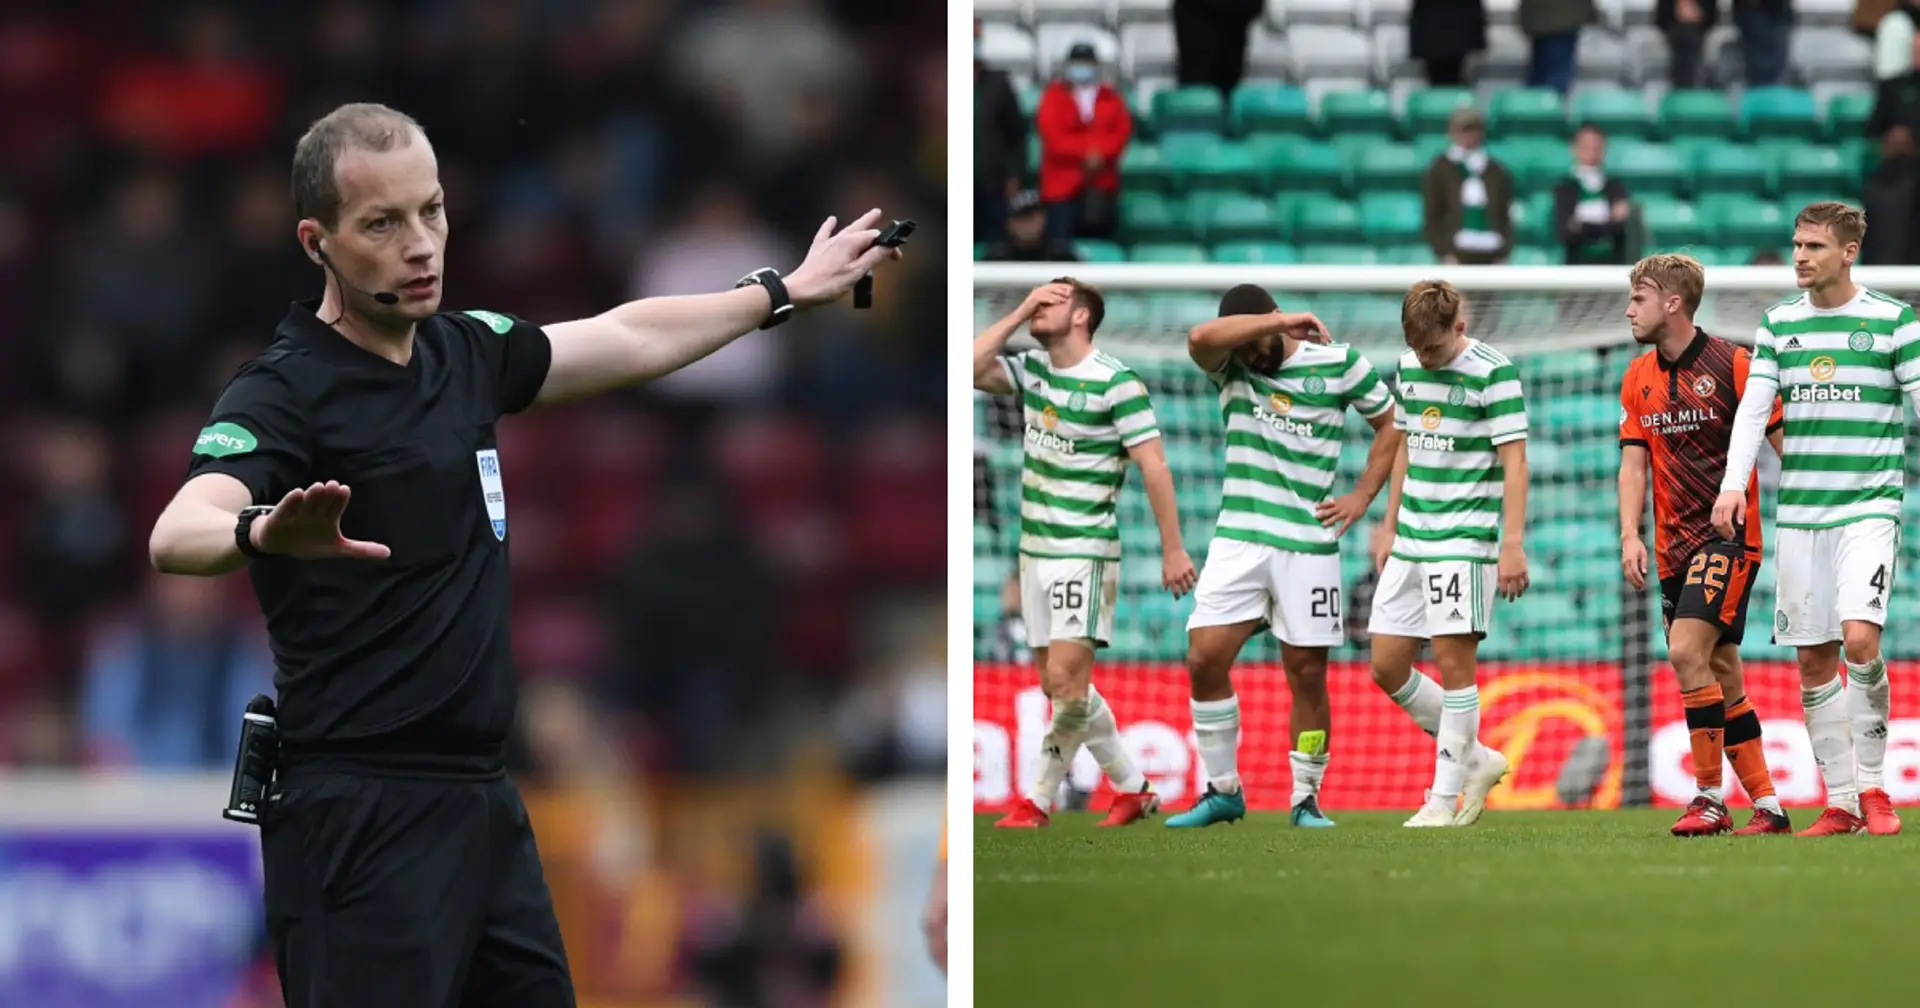 Motherwell vs Celtic suspended midway through first half after referee injury